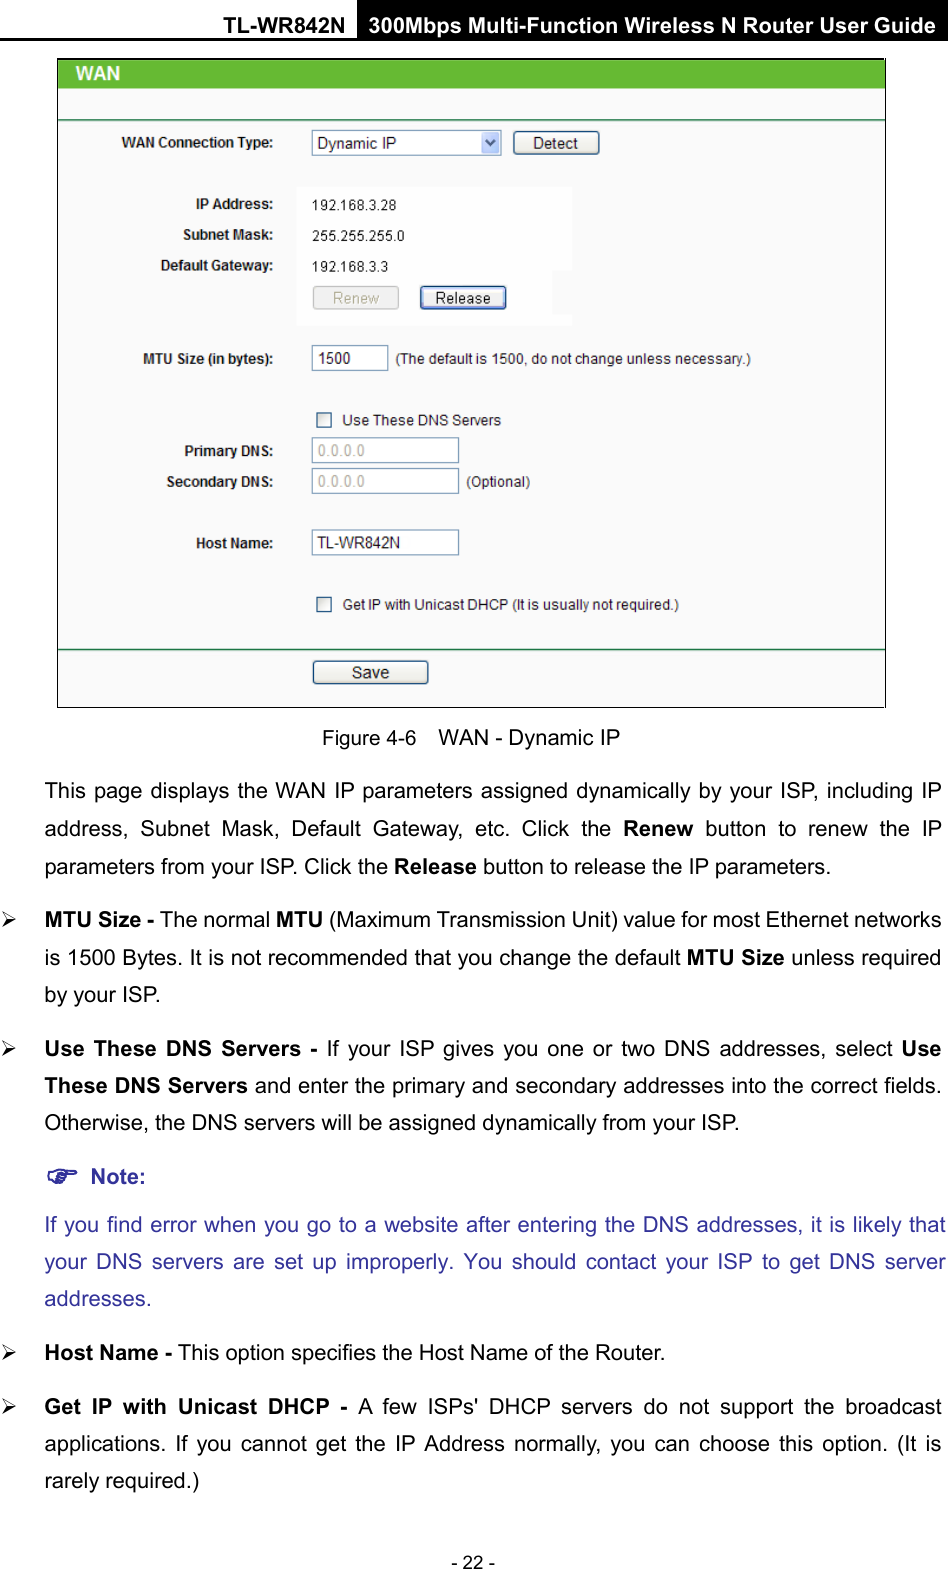 TL-WR842N 300Mbps Multi-Function Wireless N Router User Guide  - 22 -  Figure 4-6  WAN - Dynamic IP This page displays the WAN IP parameters assigned dynamically by your ISP, including IP address, Subnet Mask, Default Gateway, etc. Click the Renew button to renew the IP parameters from your ISP. Click the Release button to release the IP parameters.  MTU Size - The normal MTU (Maximum Transmission Unit) value for most Ethernet networks is 1500 Bytes. It is not recommended that you change the default MTU Size unless required by your ISP.    Use These DNS Servers -  If your ISP gives you one or two DNS addresses, select Use These DNS Servers and enter the primary and secondary addresses into the correct fields. Otherwise, the DNS servers will be assigned dynamically from your ISP.    Note: If you find error when you go to a website after entering the DNS addresses, it is likely that your DNS servers are set up improperly. You should contact your ISP to get DNS server addresses.    Host Name - This option specifies the Host Name of the Router.  Get IP with Unicast DHCP - A few ISPs&apos; DHCP servers do not support the broadcast applications. If you cannot get the IP Address normally, you can choose this option.  (It  is rarely required.) 